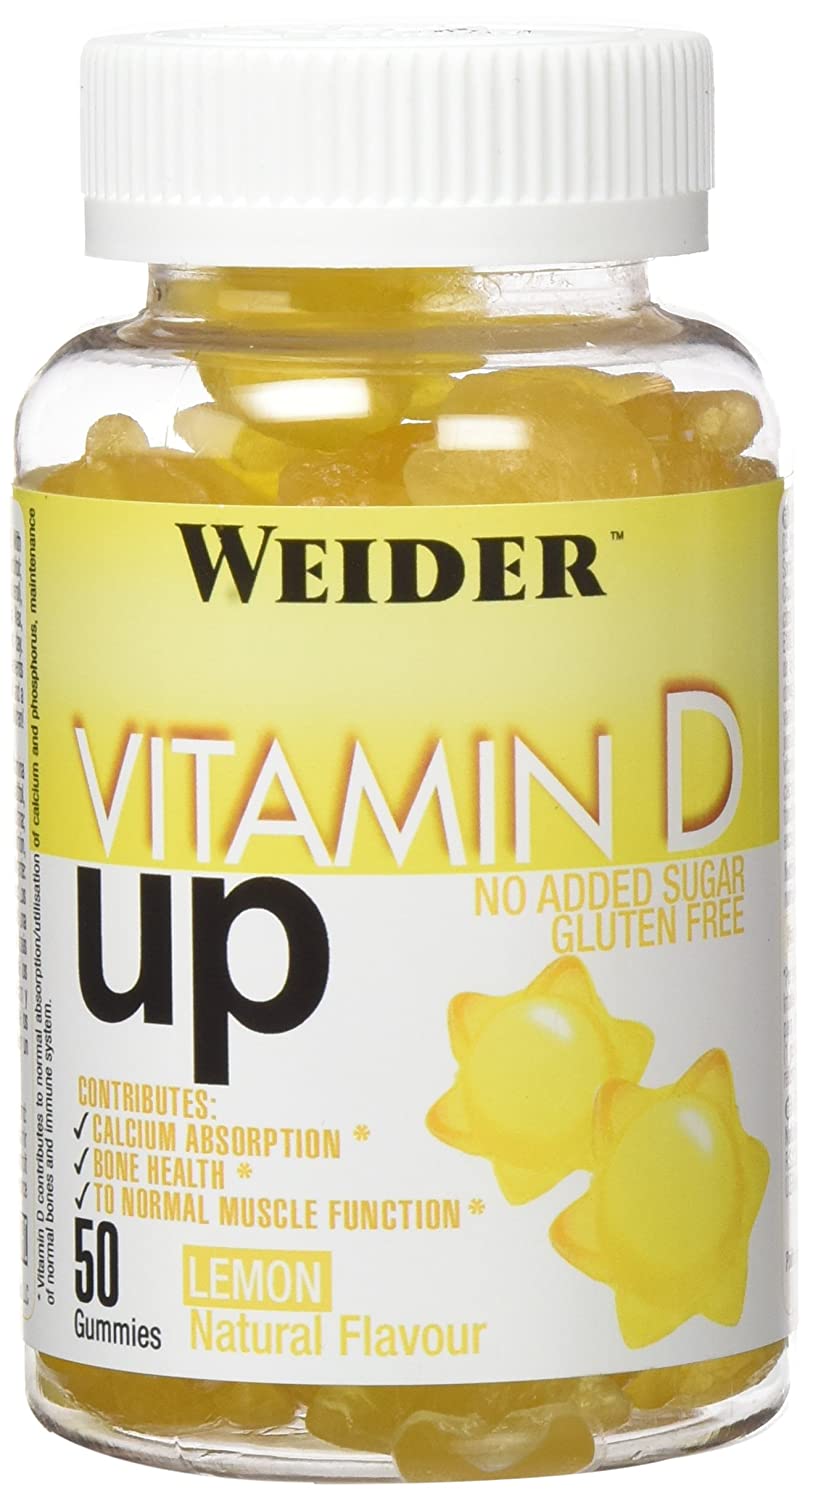 Image of Vitamin D Up Weider 50 Caramelle